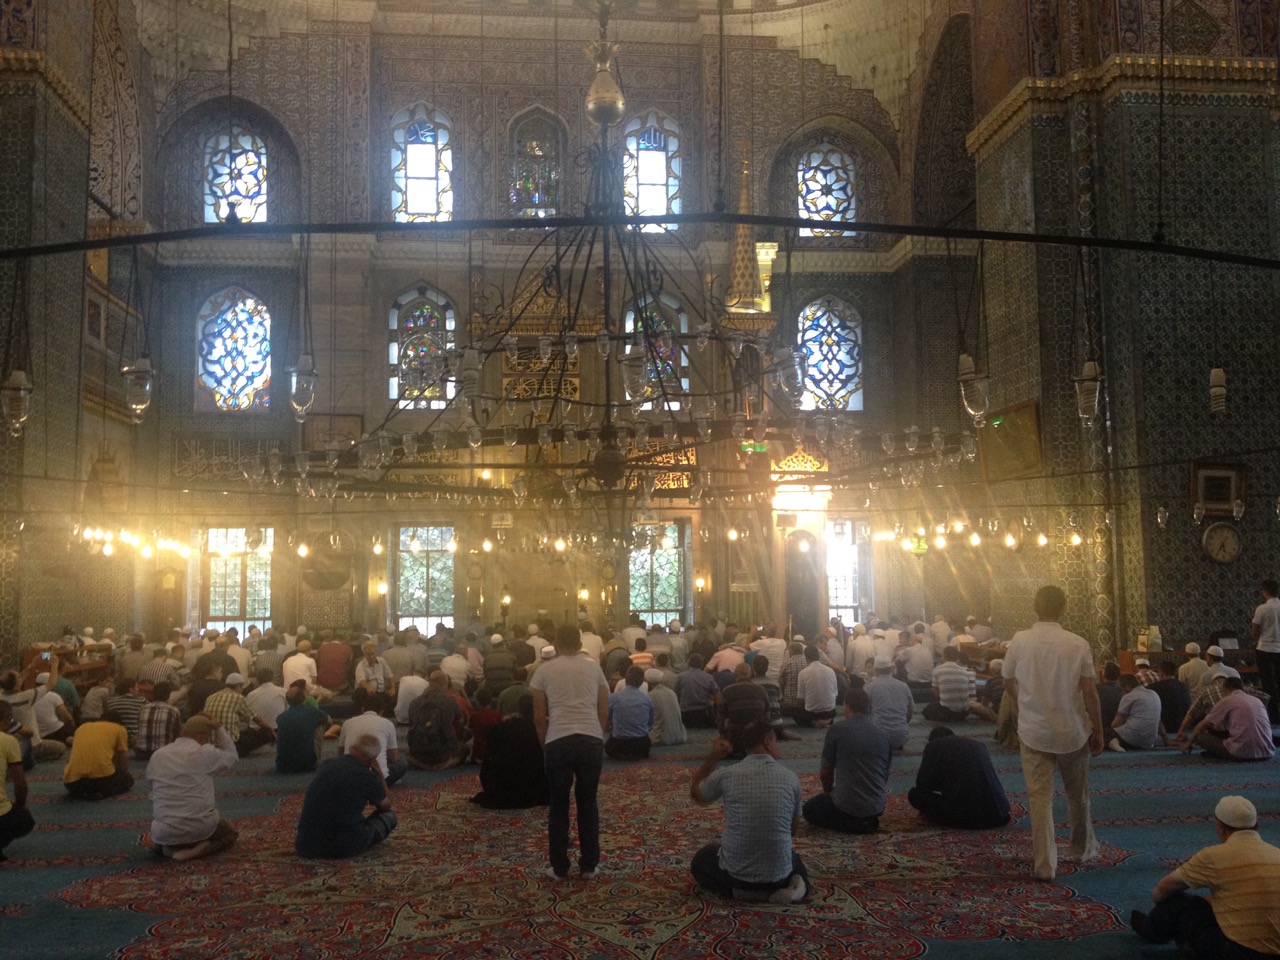 People praying inside the New Mosque, Istanbul.